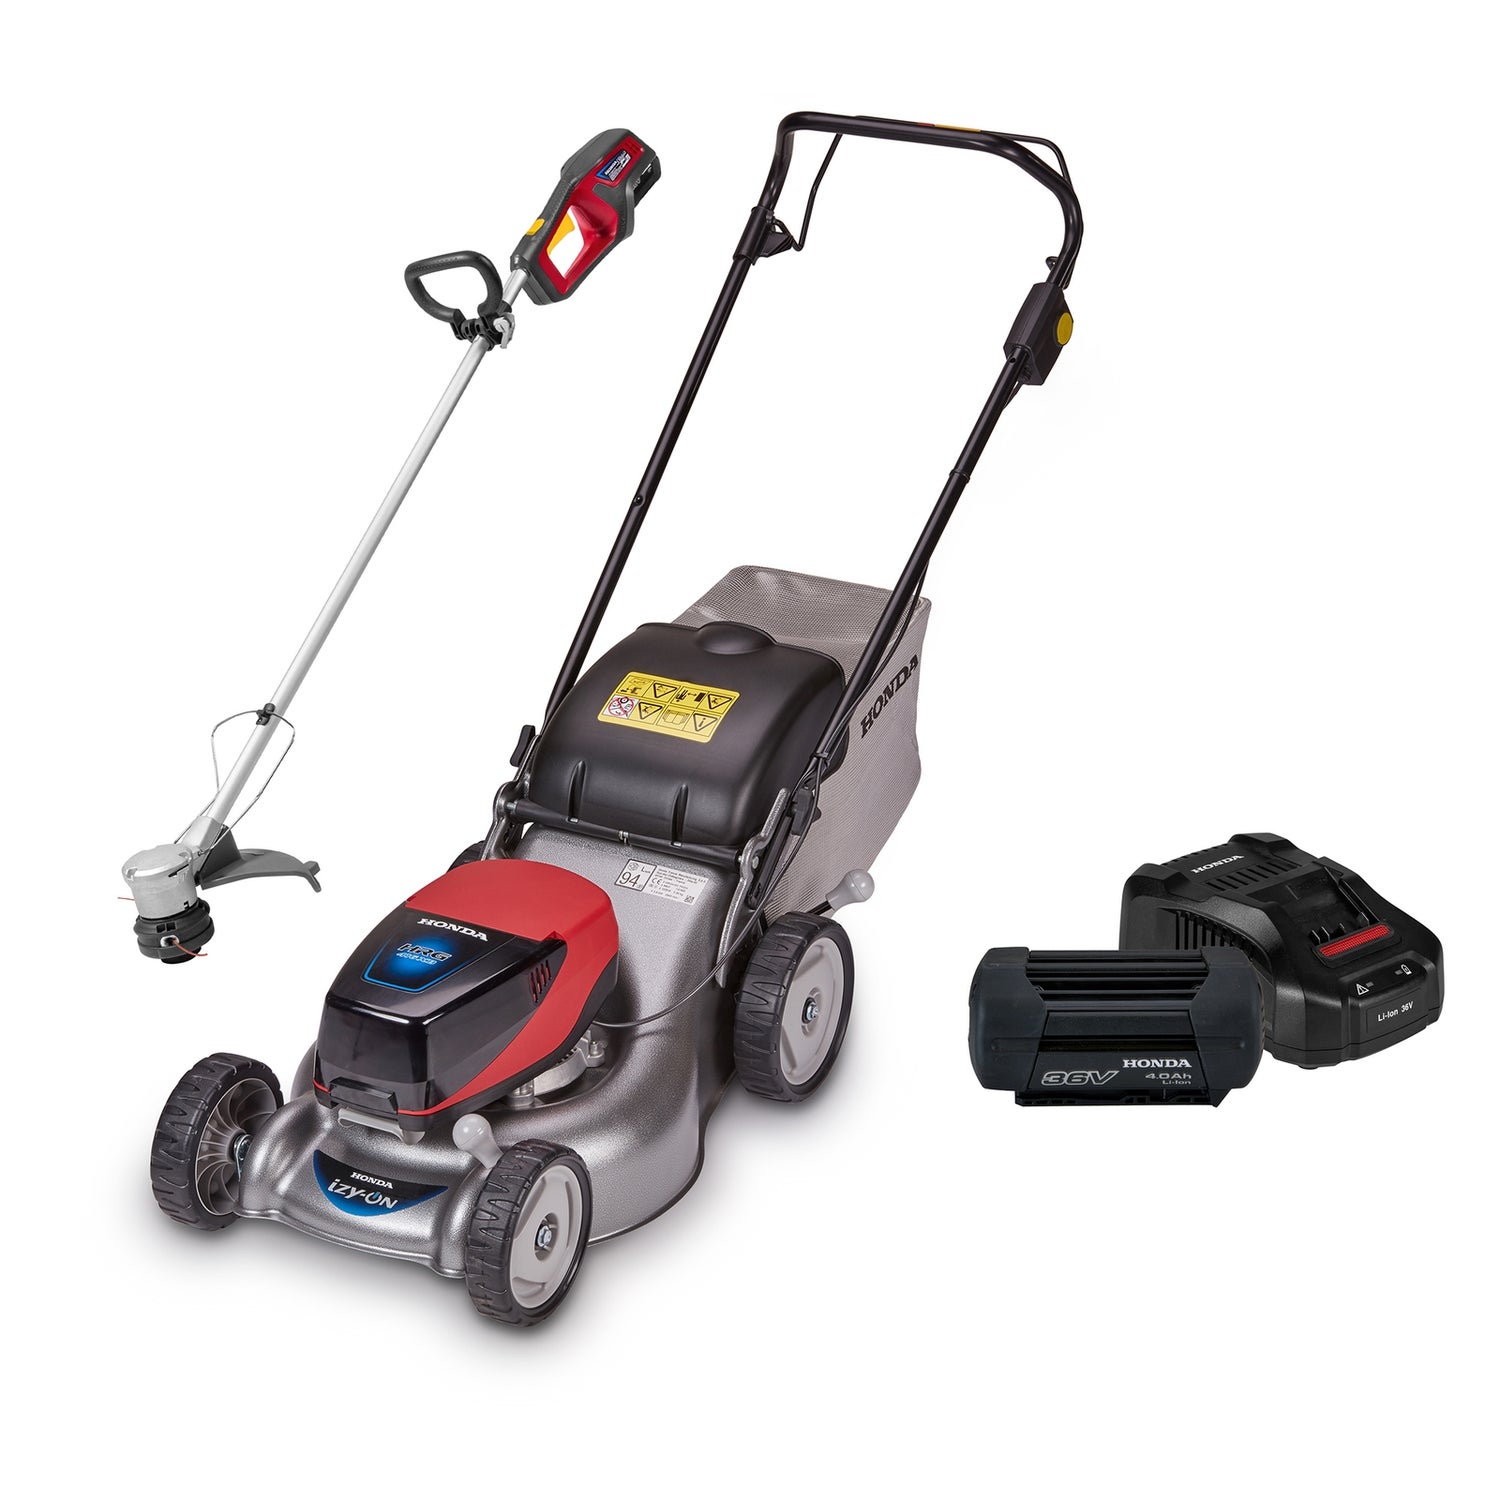 HRG 416 XB Cordless Lawnmower Inc. Cordless Lawn Trimmer + 4Ah Battery & Fast Charger